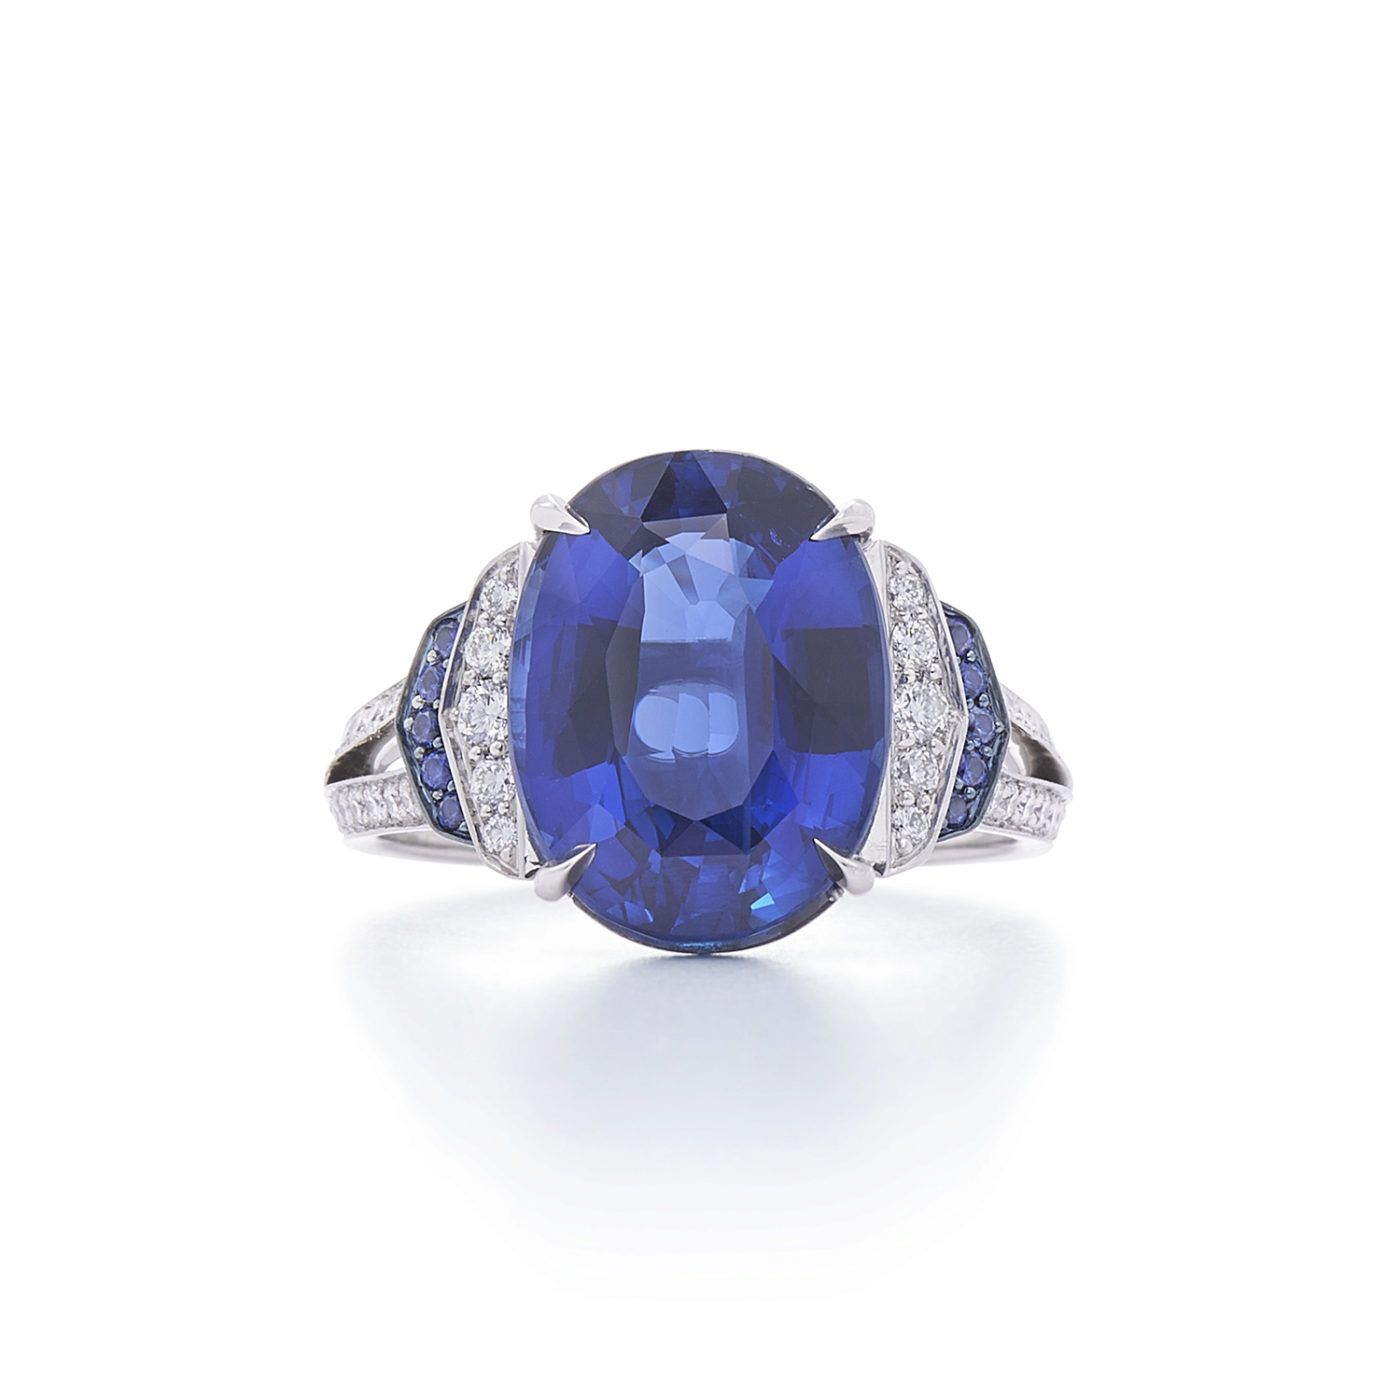 5 Reasons Brides Are Buying Sapphire Engagement Rings